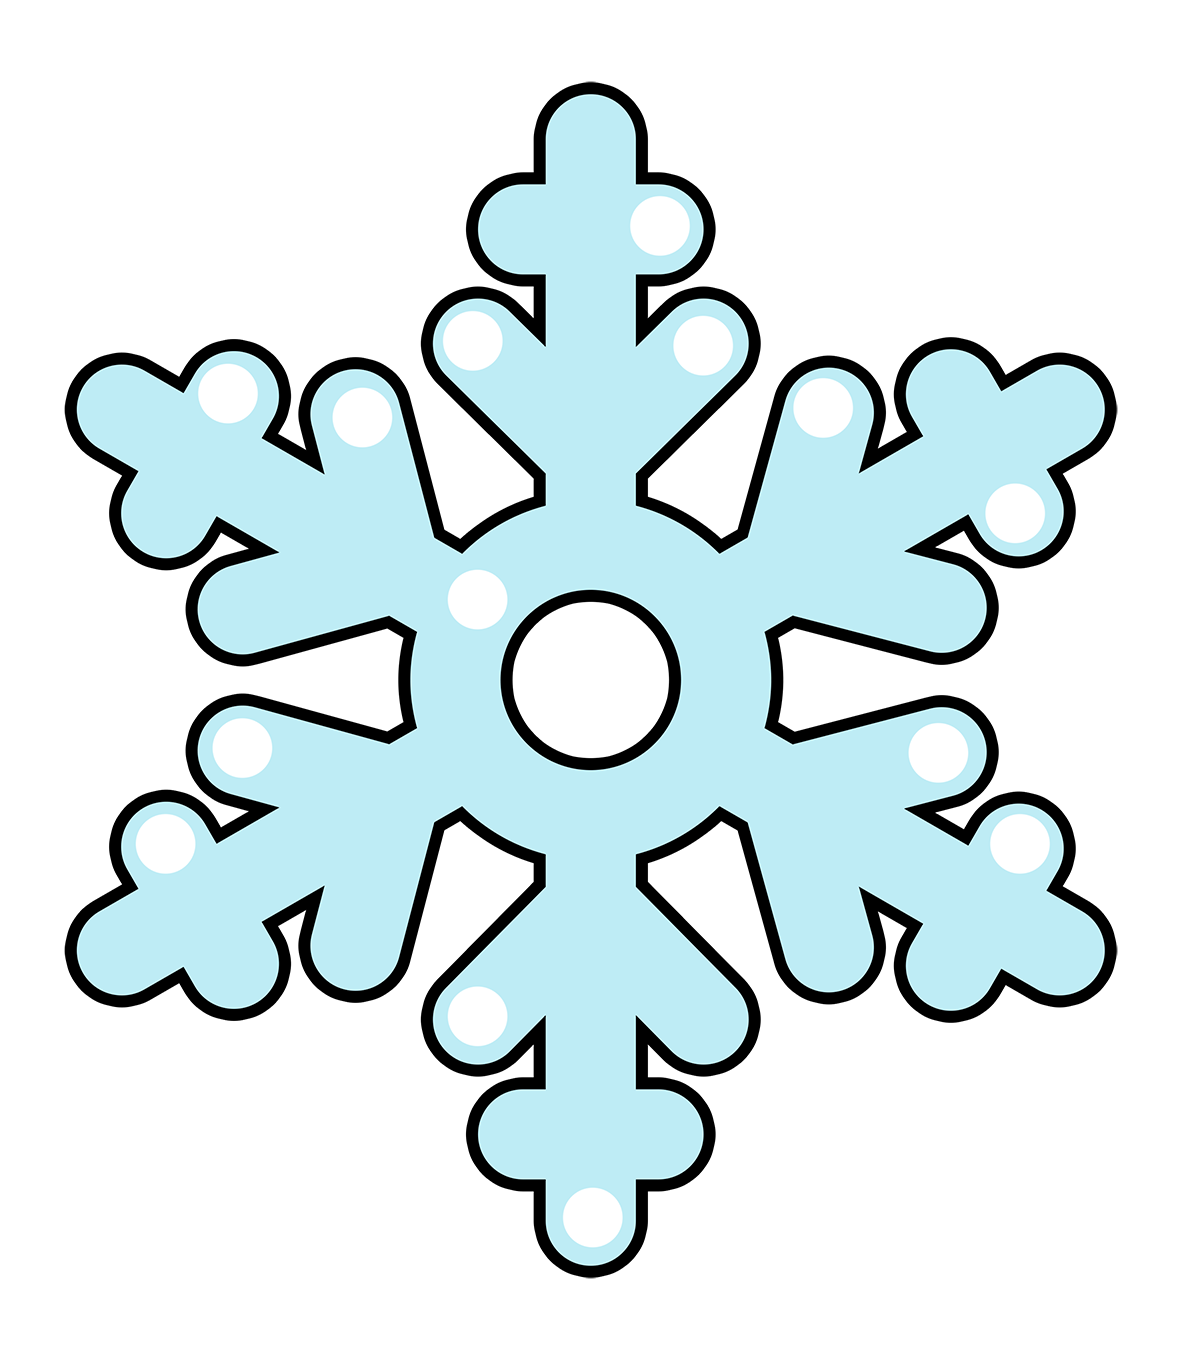  collection of simple. Snowflake clipart basic